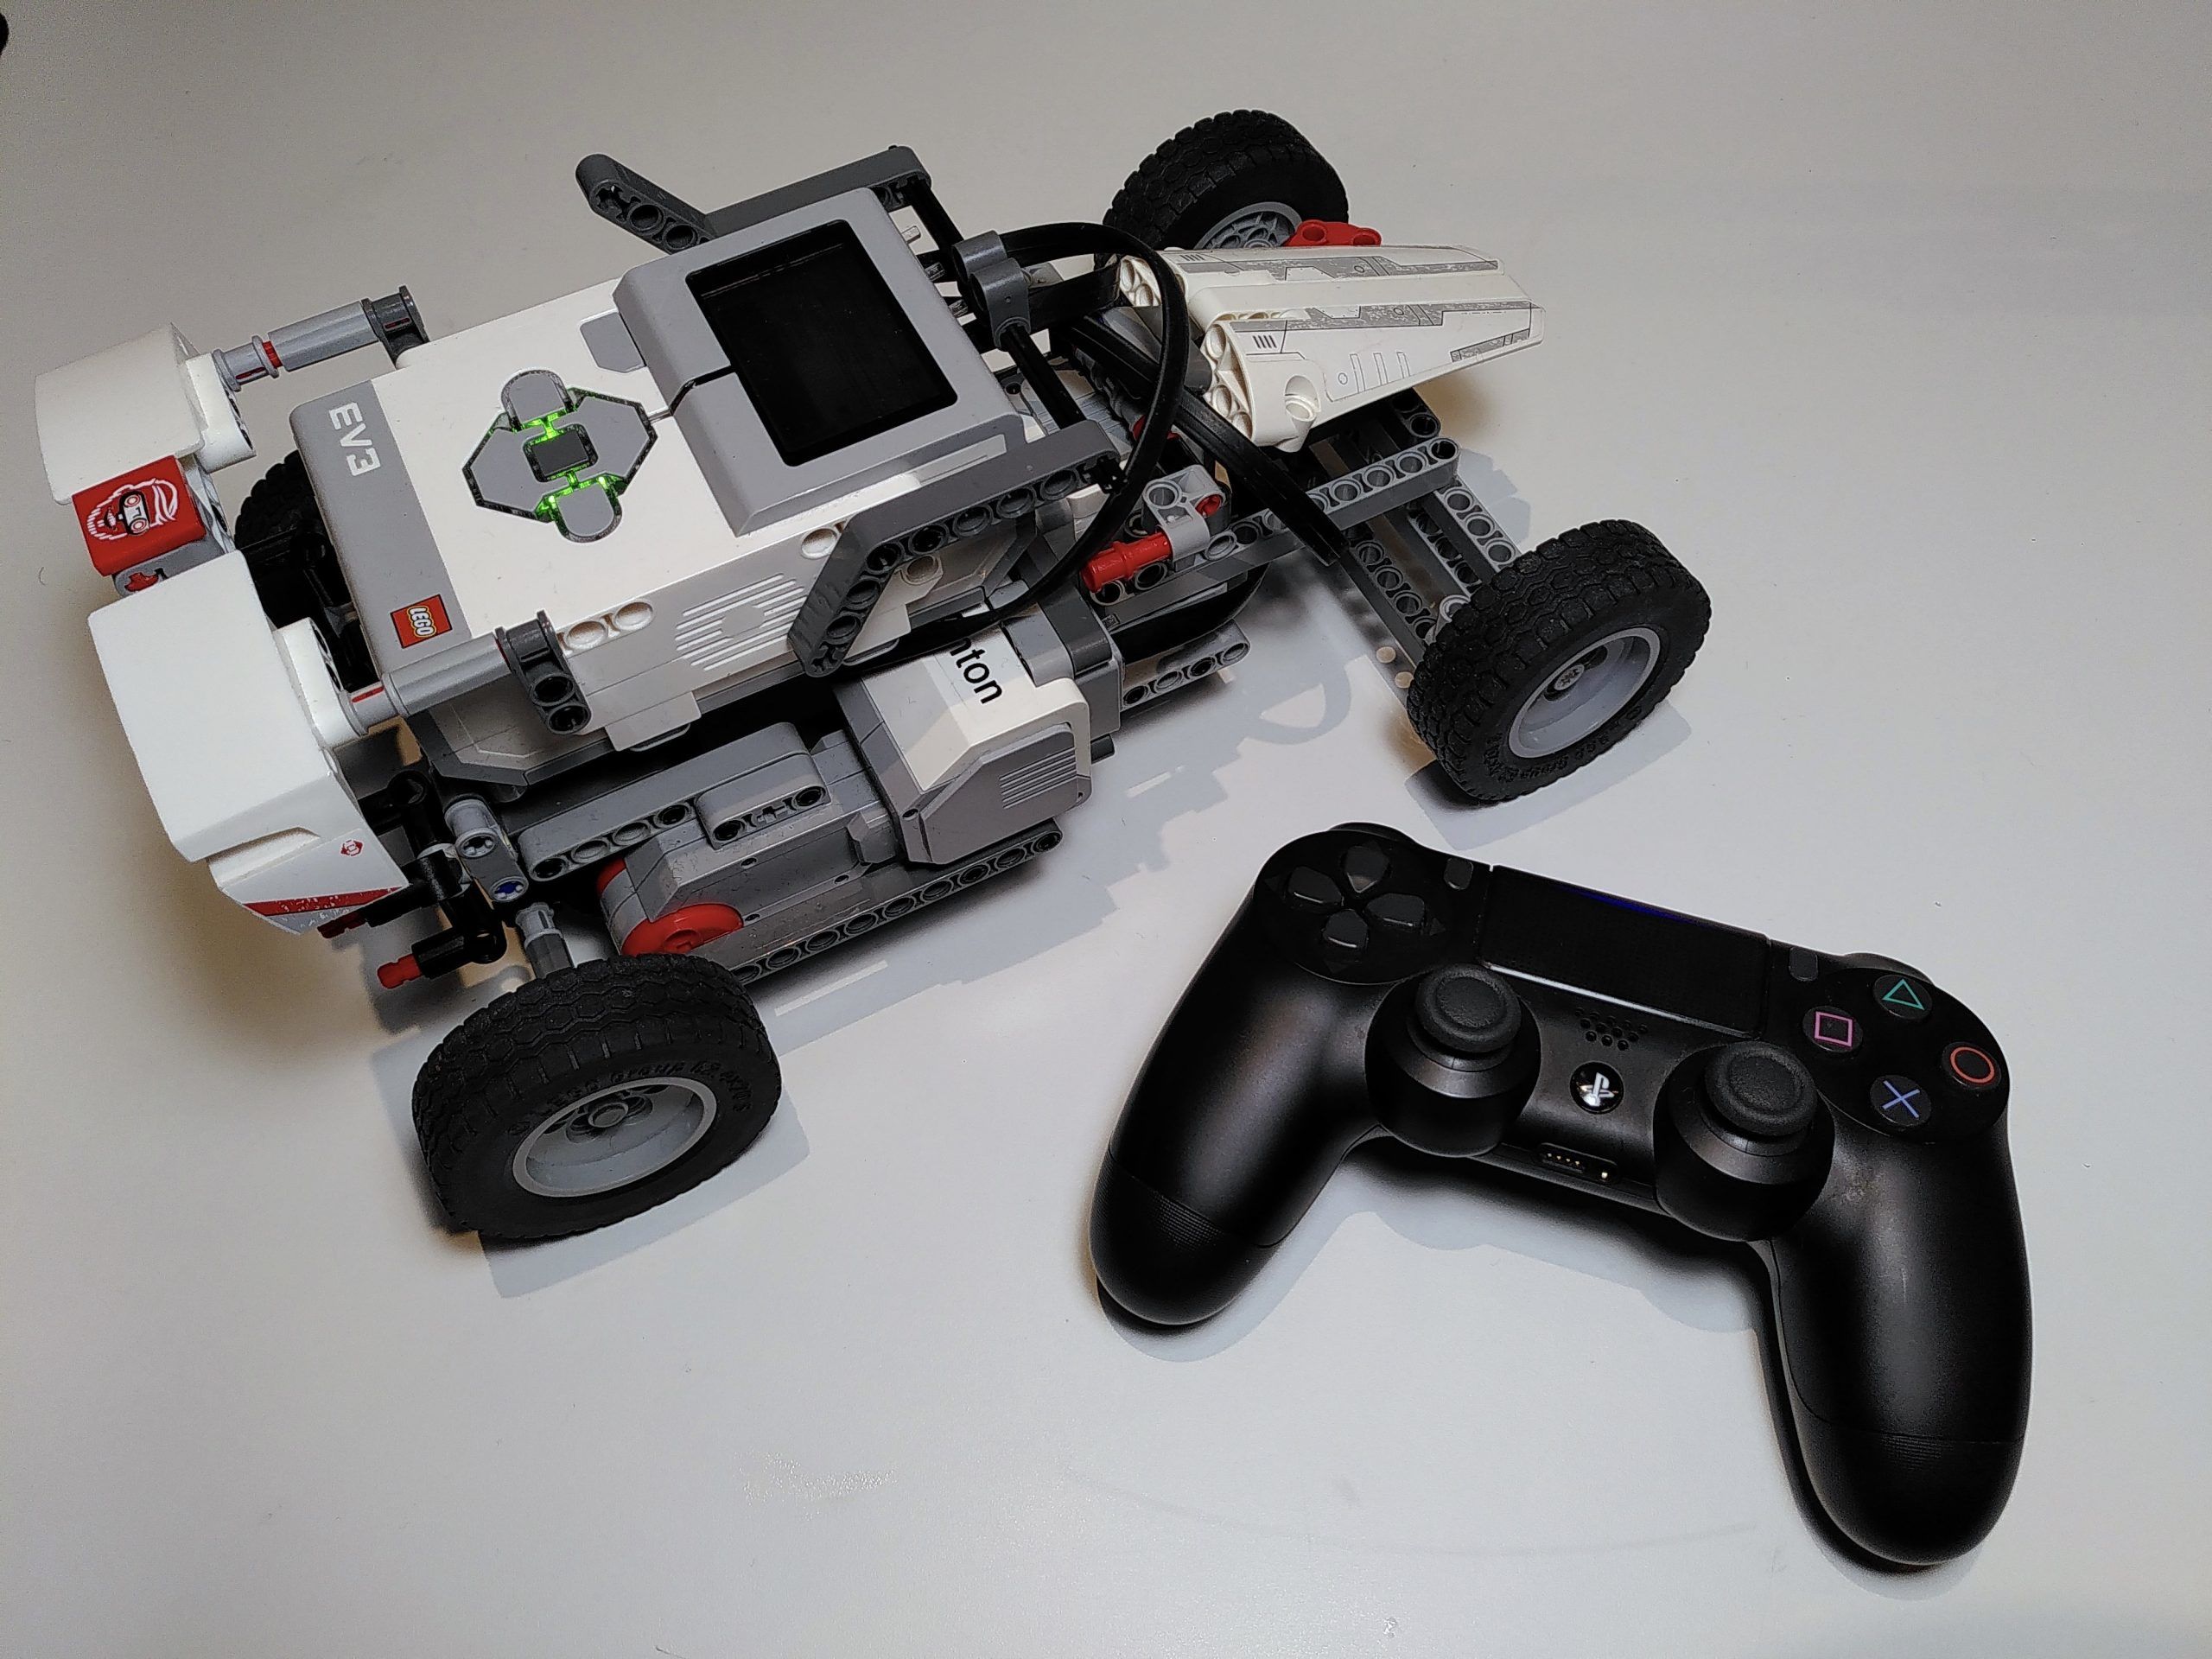 MINDSTORMS EV3 Racecar with PS4 controller